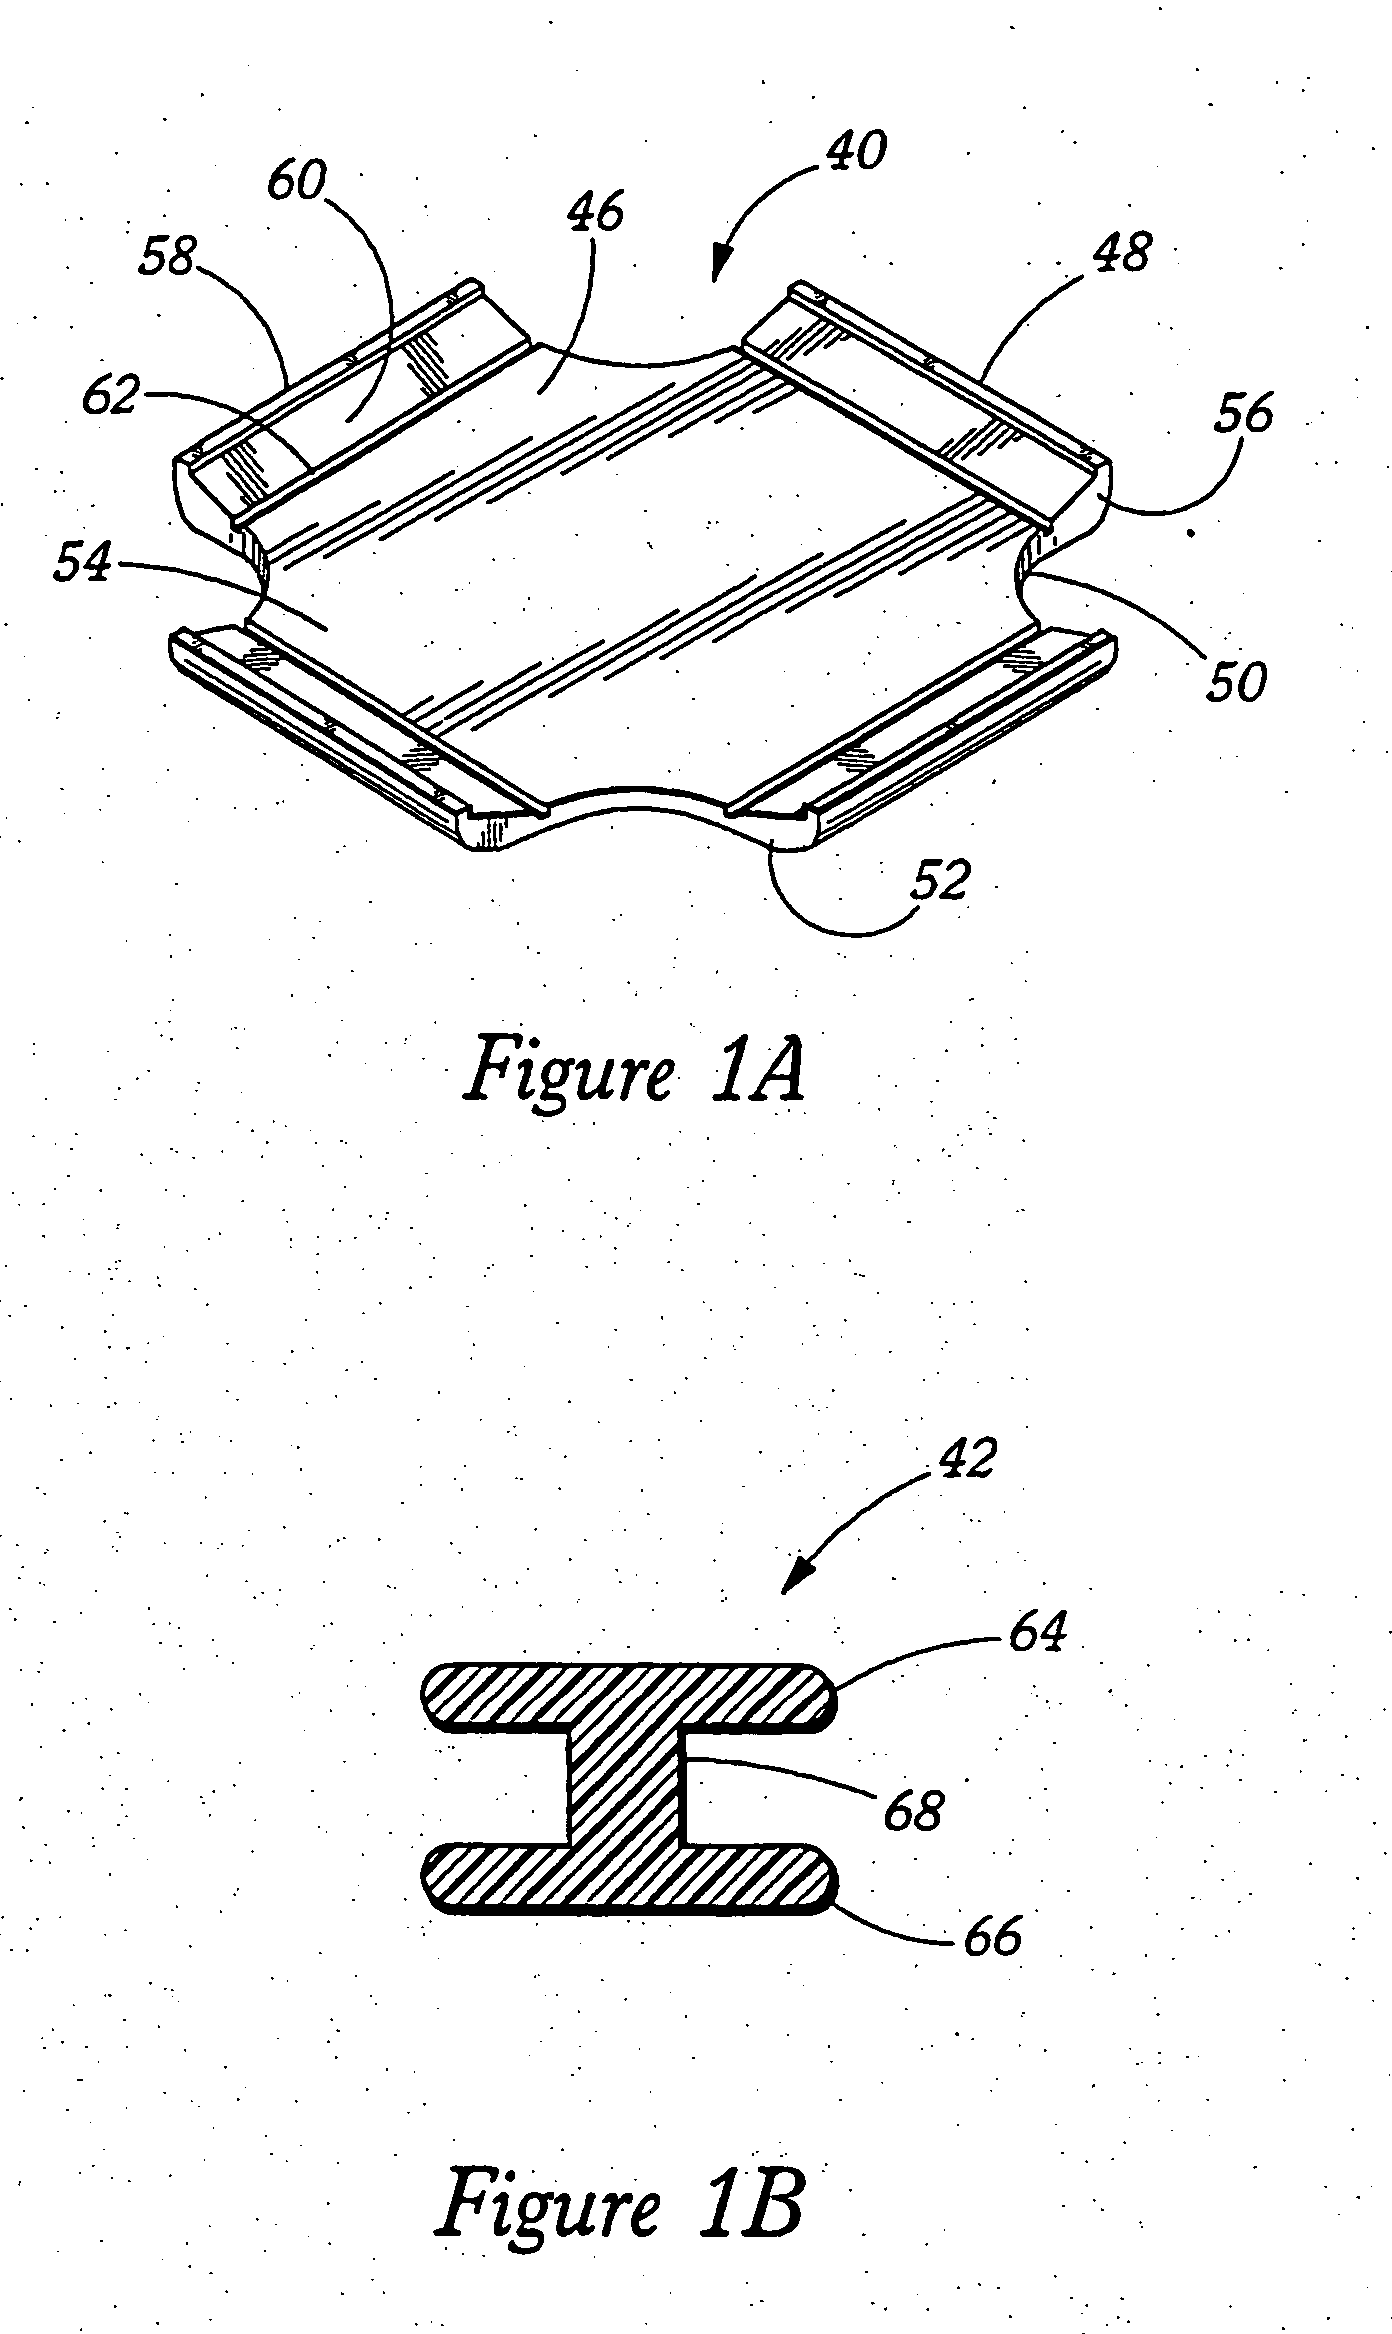 Direct forming of non-textile fabric elements from thermoplastic pellets or the like